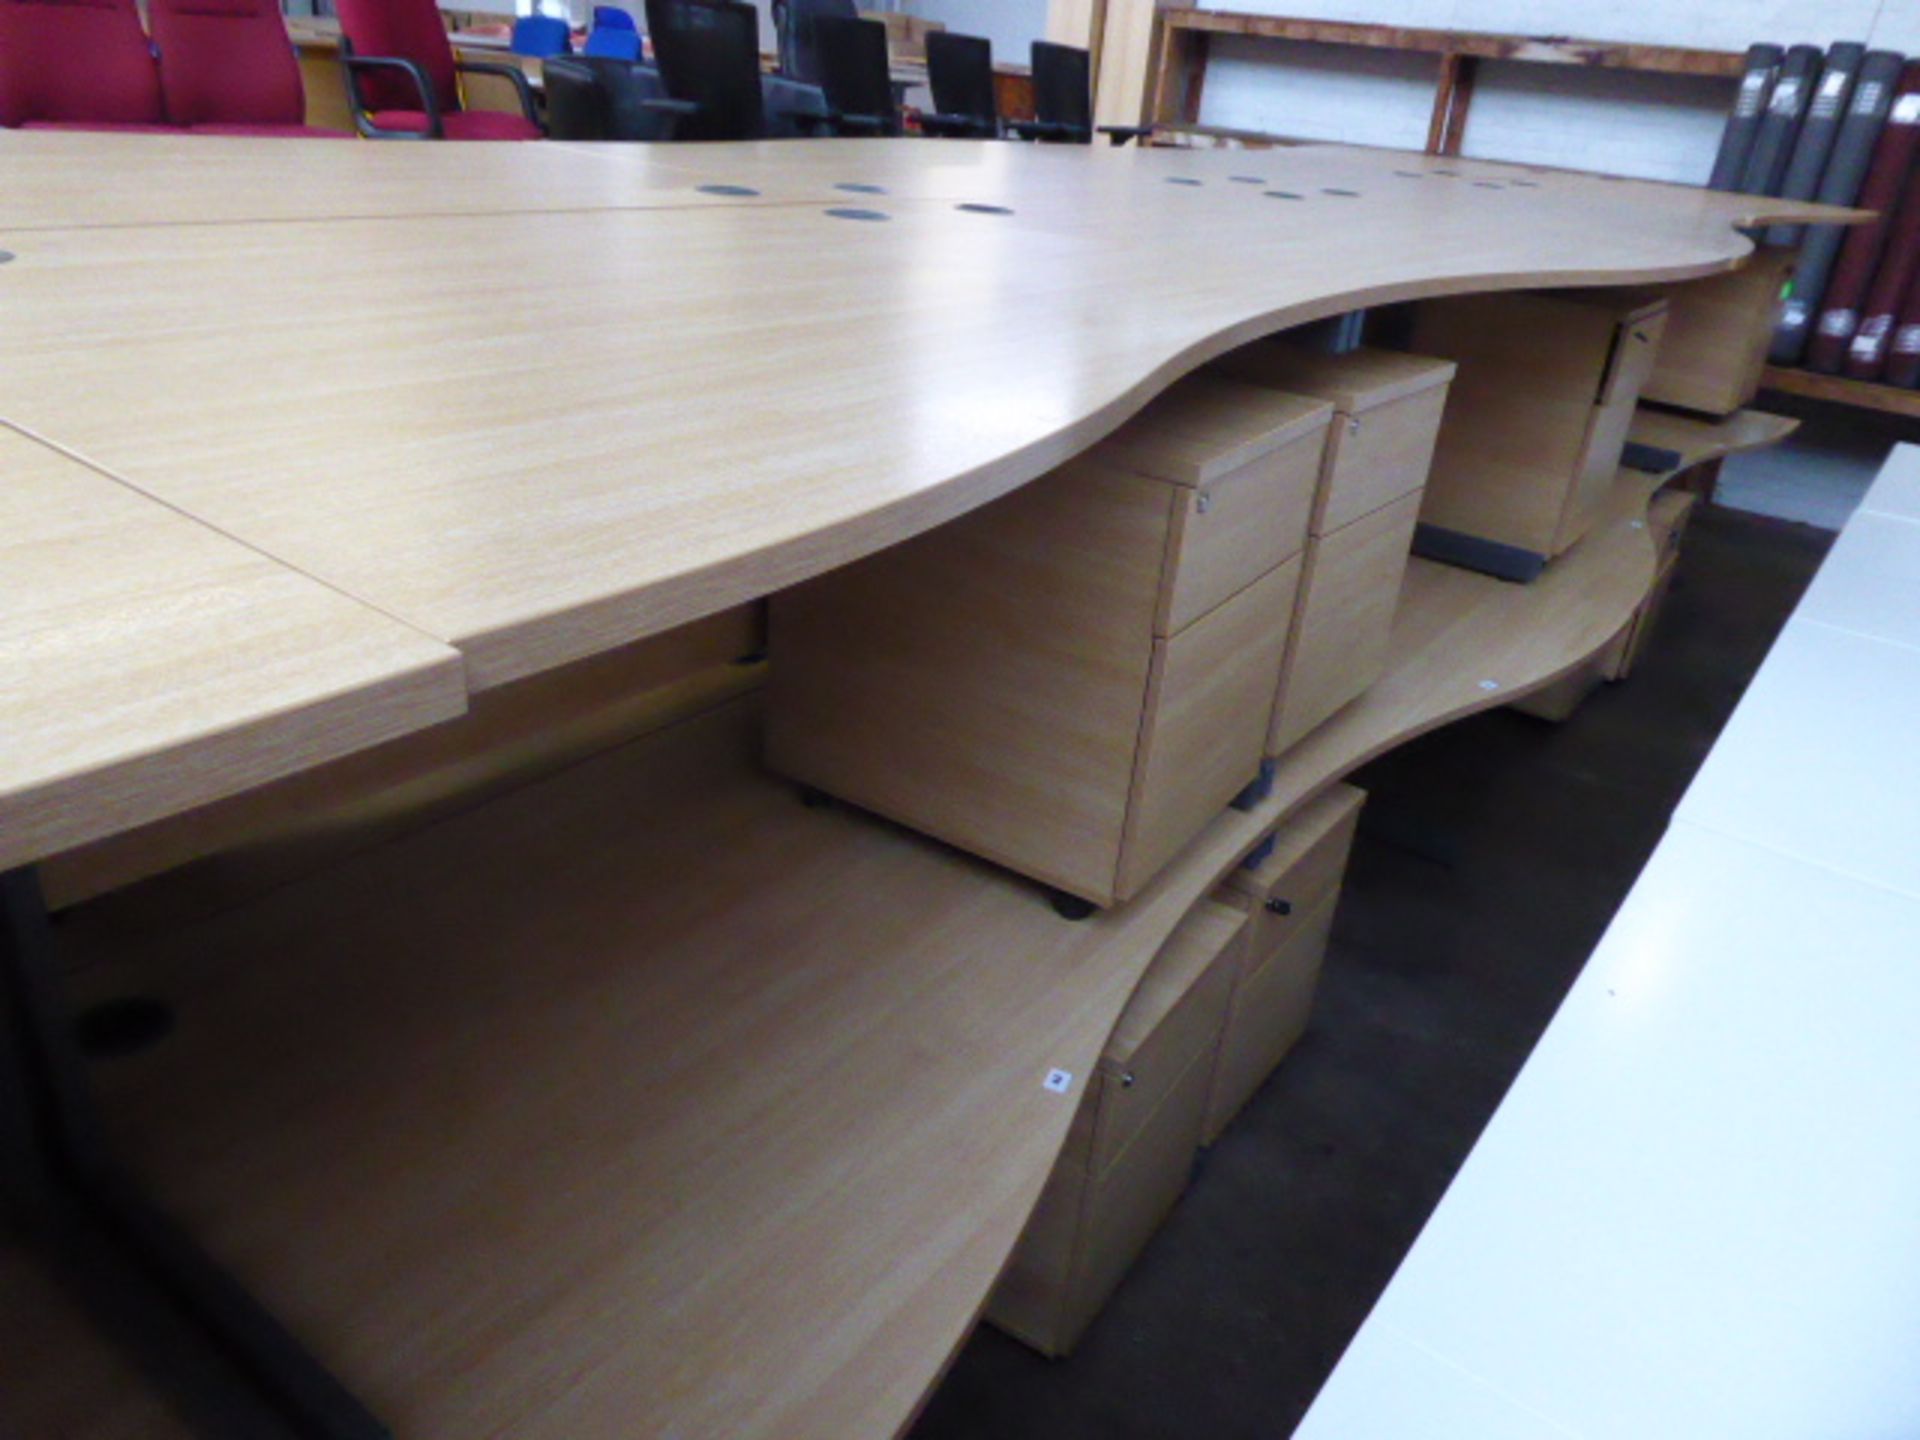 2 140cm light oak effect desks with a wave on cantilever legs and 2 matching pedestals with matching